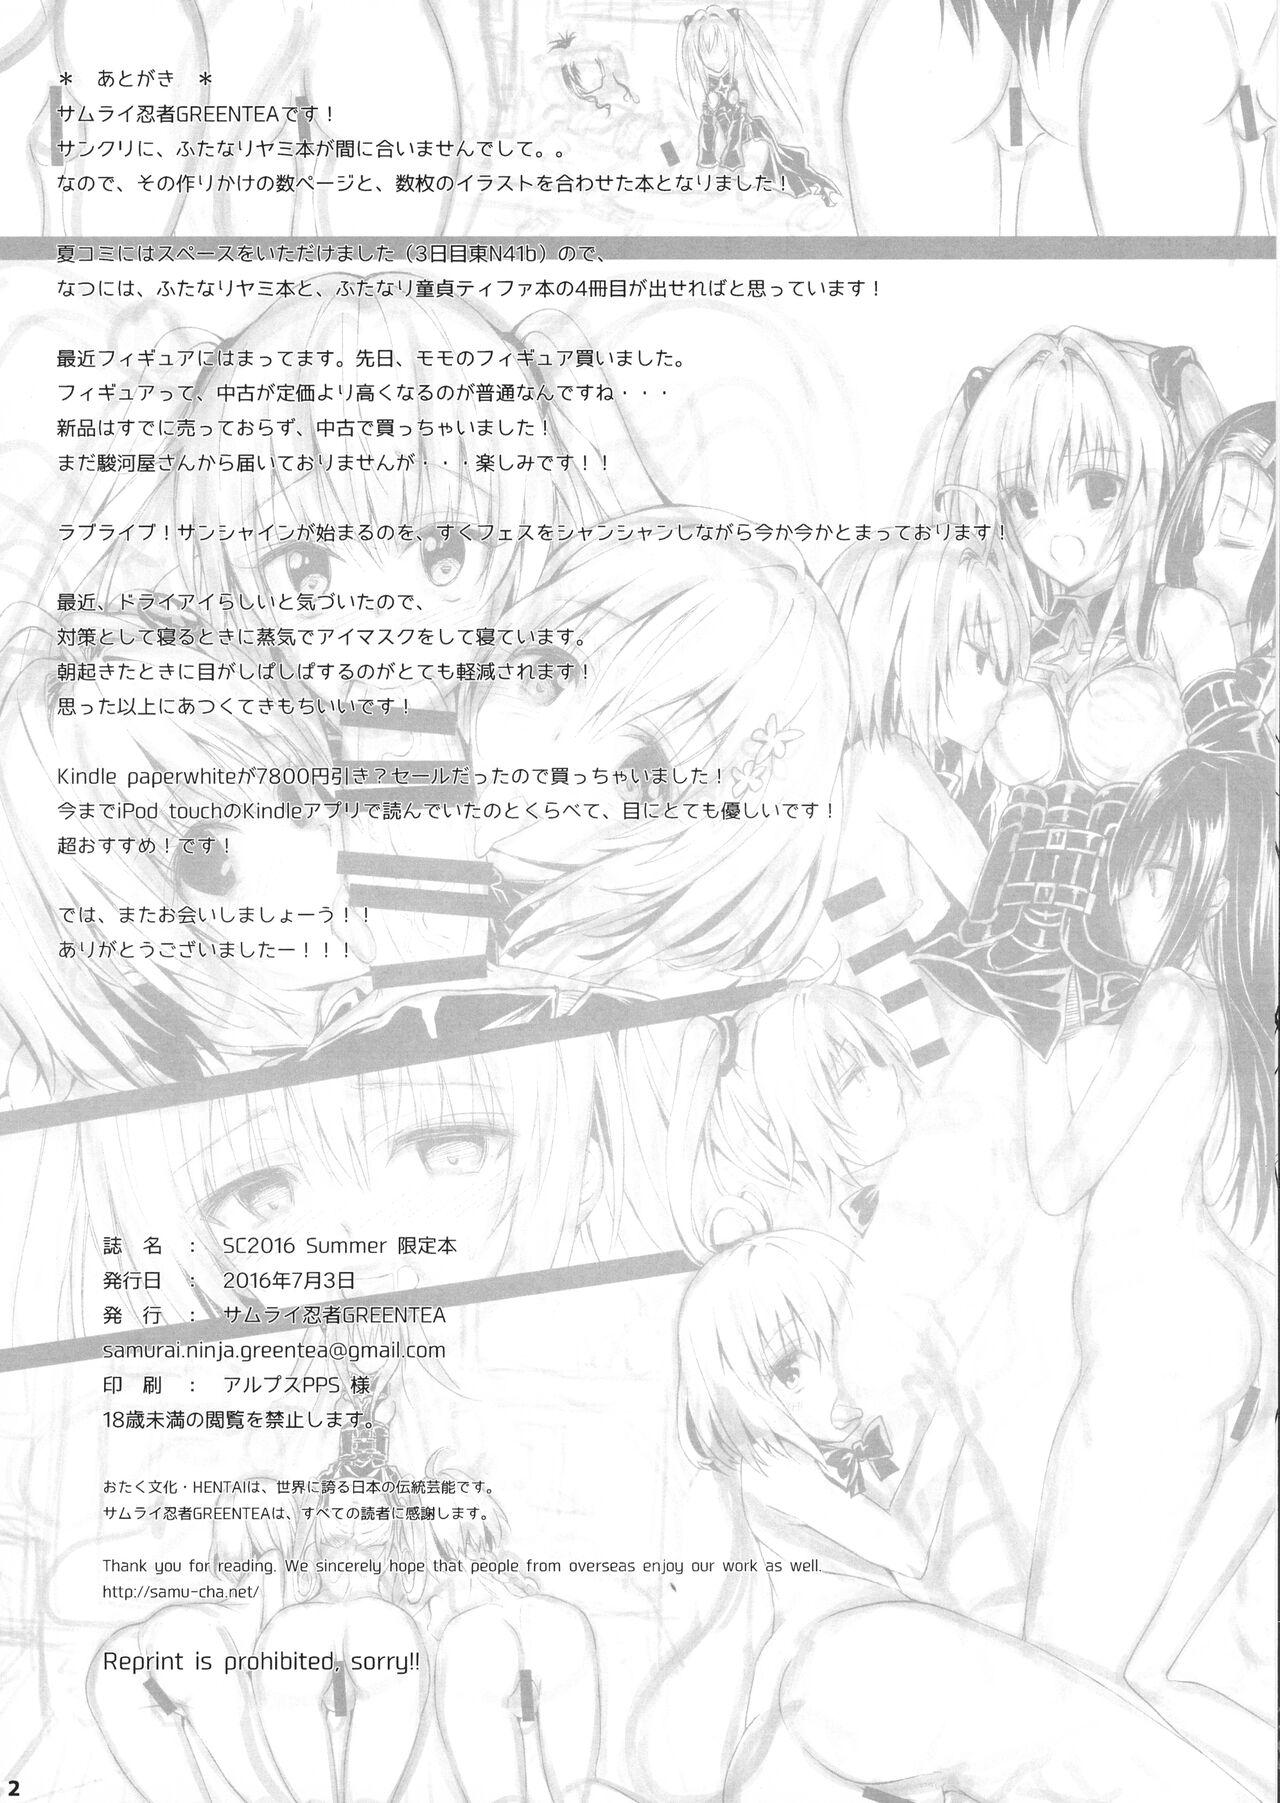 Ejaculations SC2016 Summer Gentei Hon - To love ru Hot Wife - Page 3